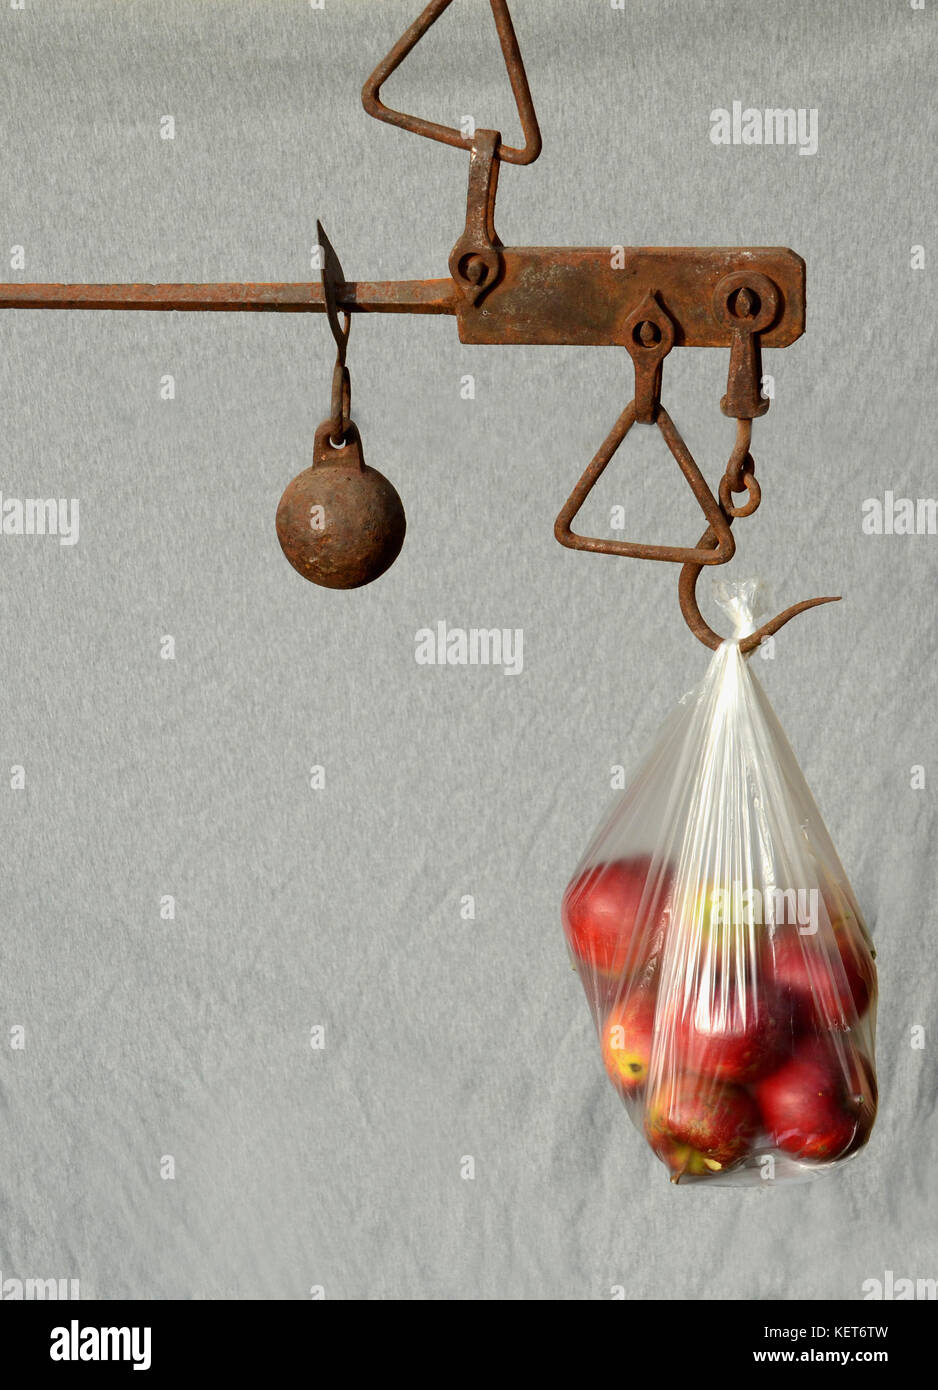 Steelyard scale weighs a plastic bag with apples. This scale works due to the principle of the lever. Stock Photo